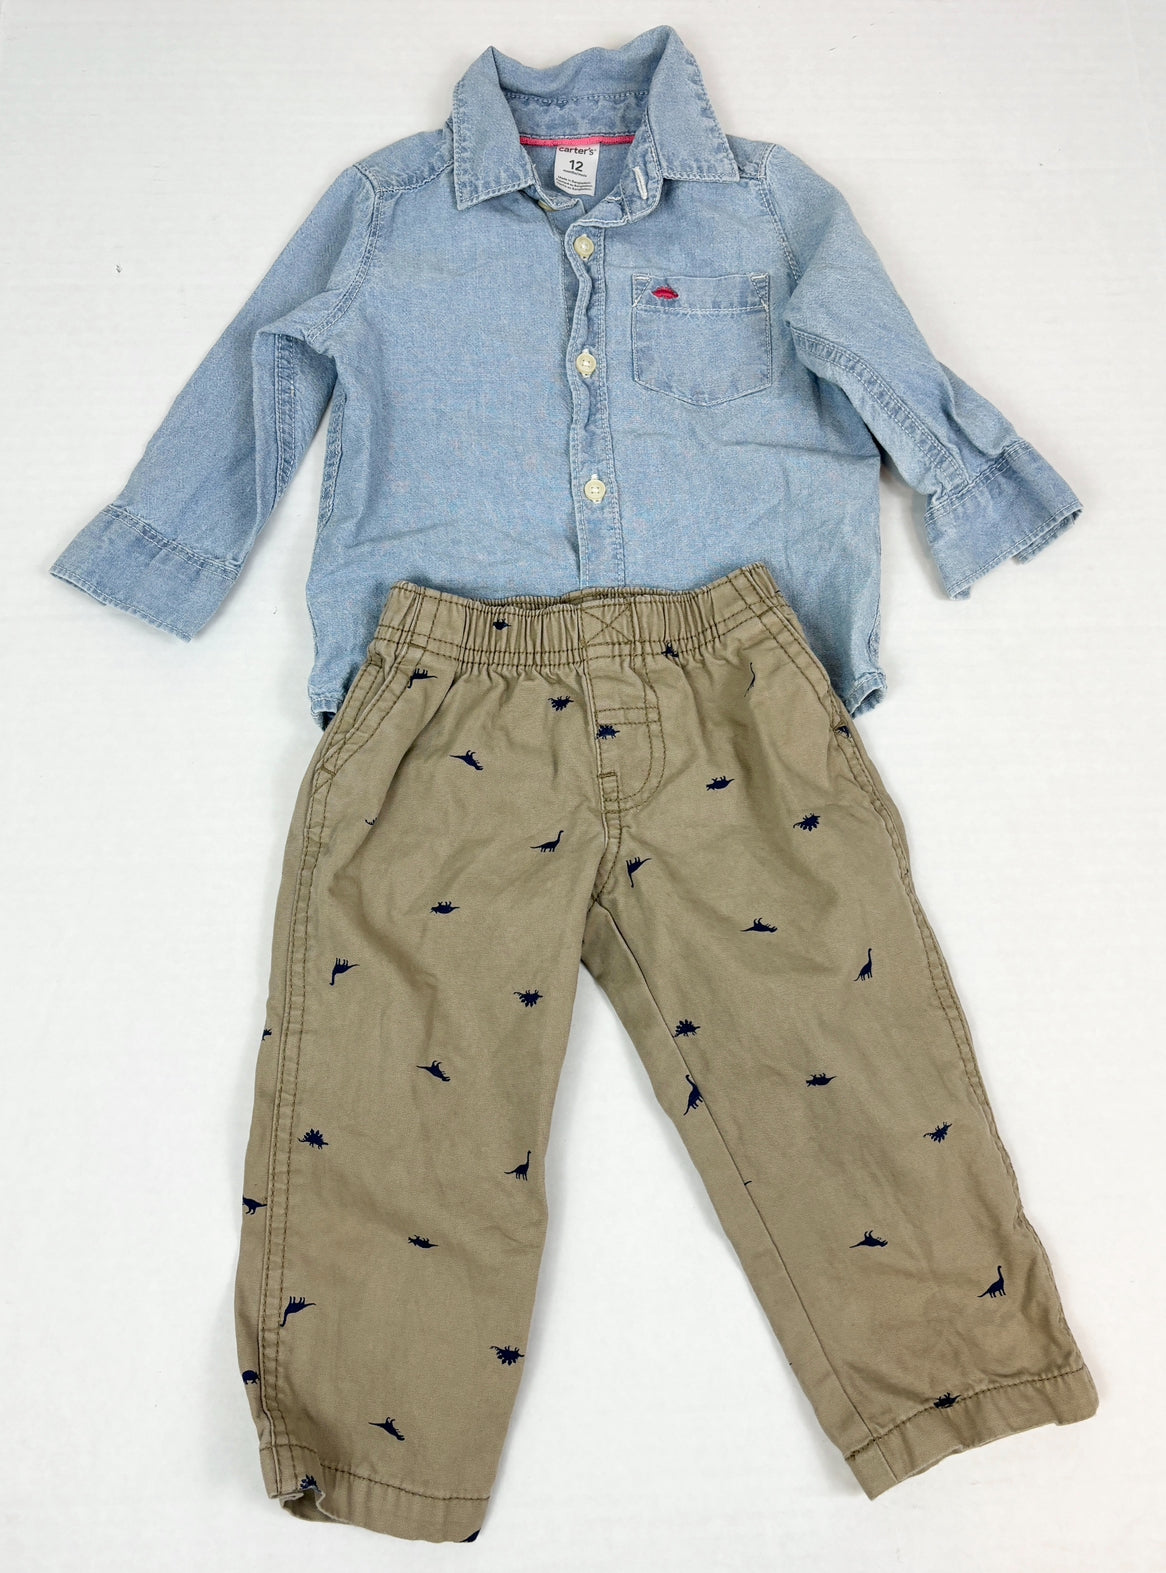 12 months Carters dino set- blue button up and khakis with dinos